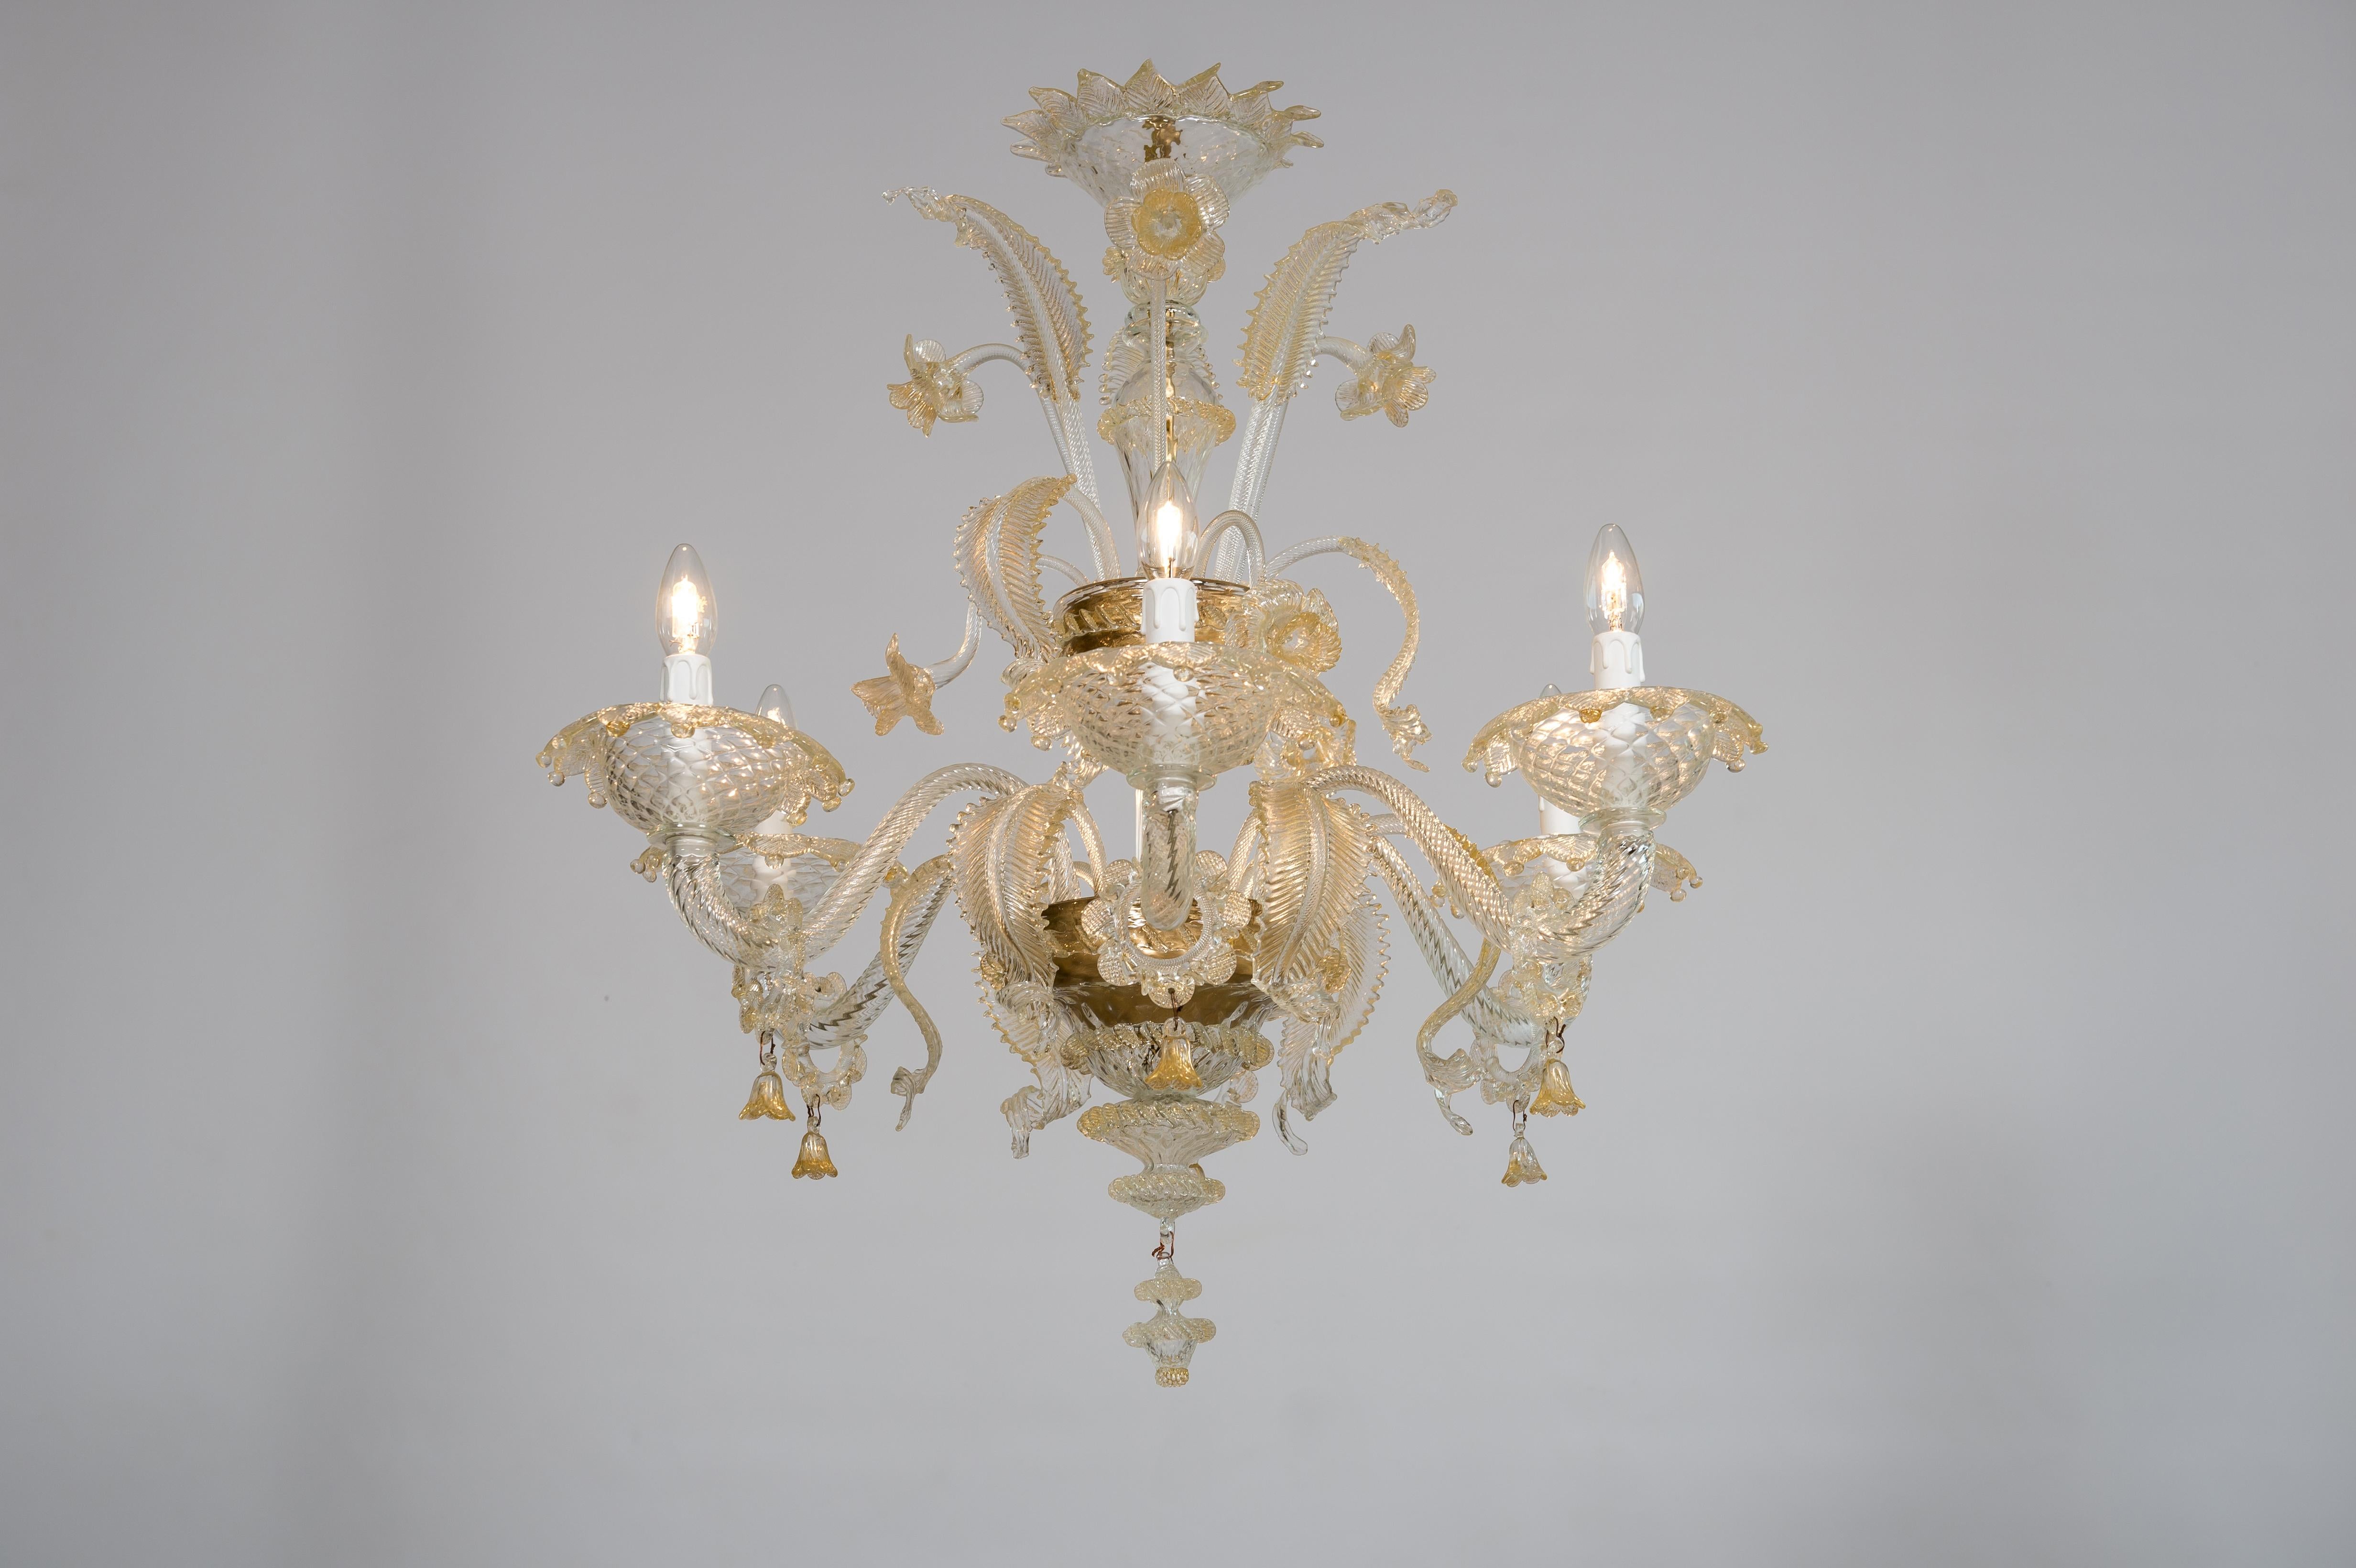 Floral Murano Glass Chandelier with “Riga Dritta” Decorations, 20th Century 13